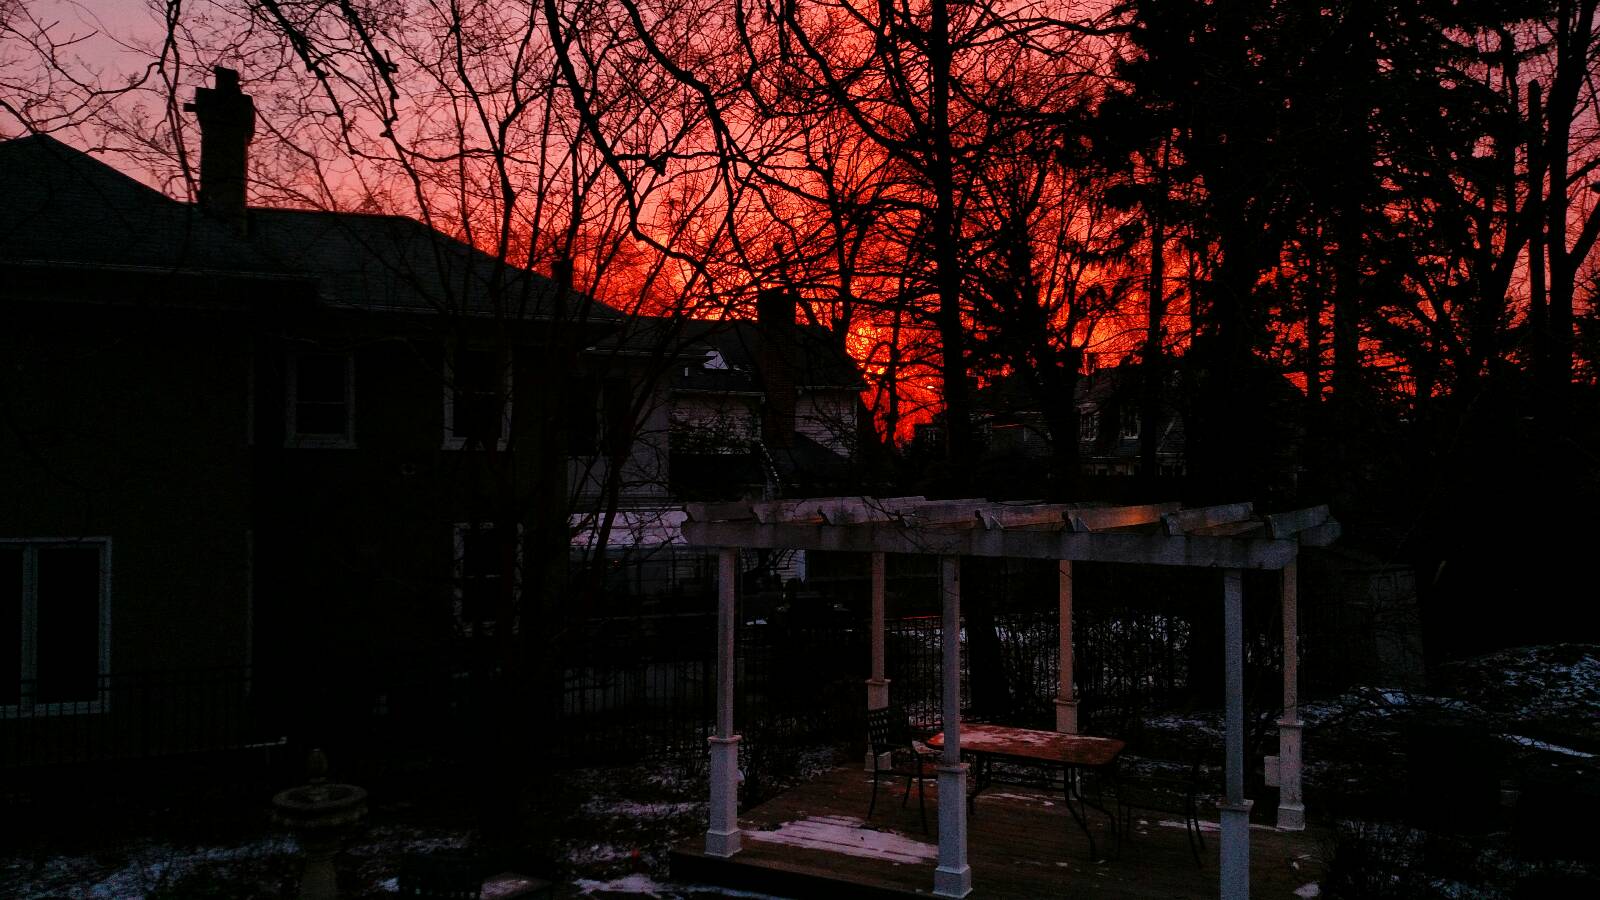 "Red sky in the morning, sailor's take warning." Sunrise in DC ahead of the snowstorm. (Courtesy WTOP listener)